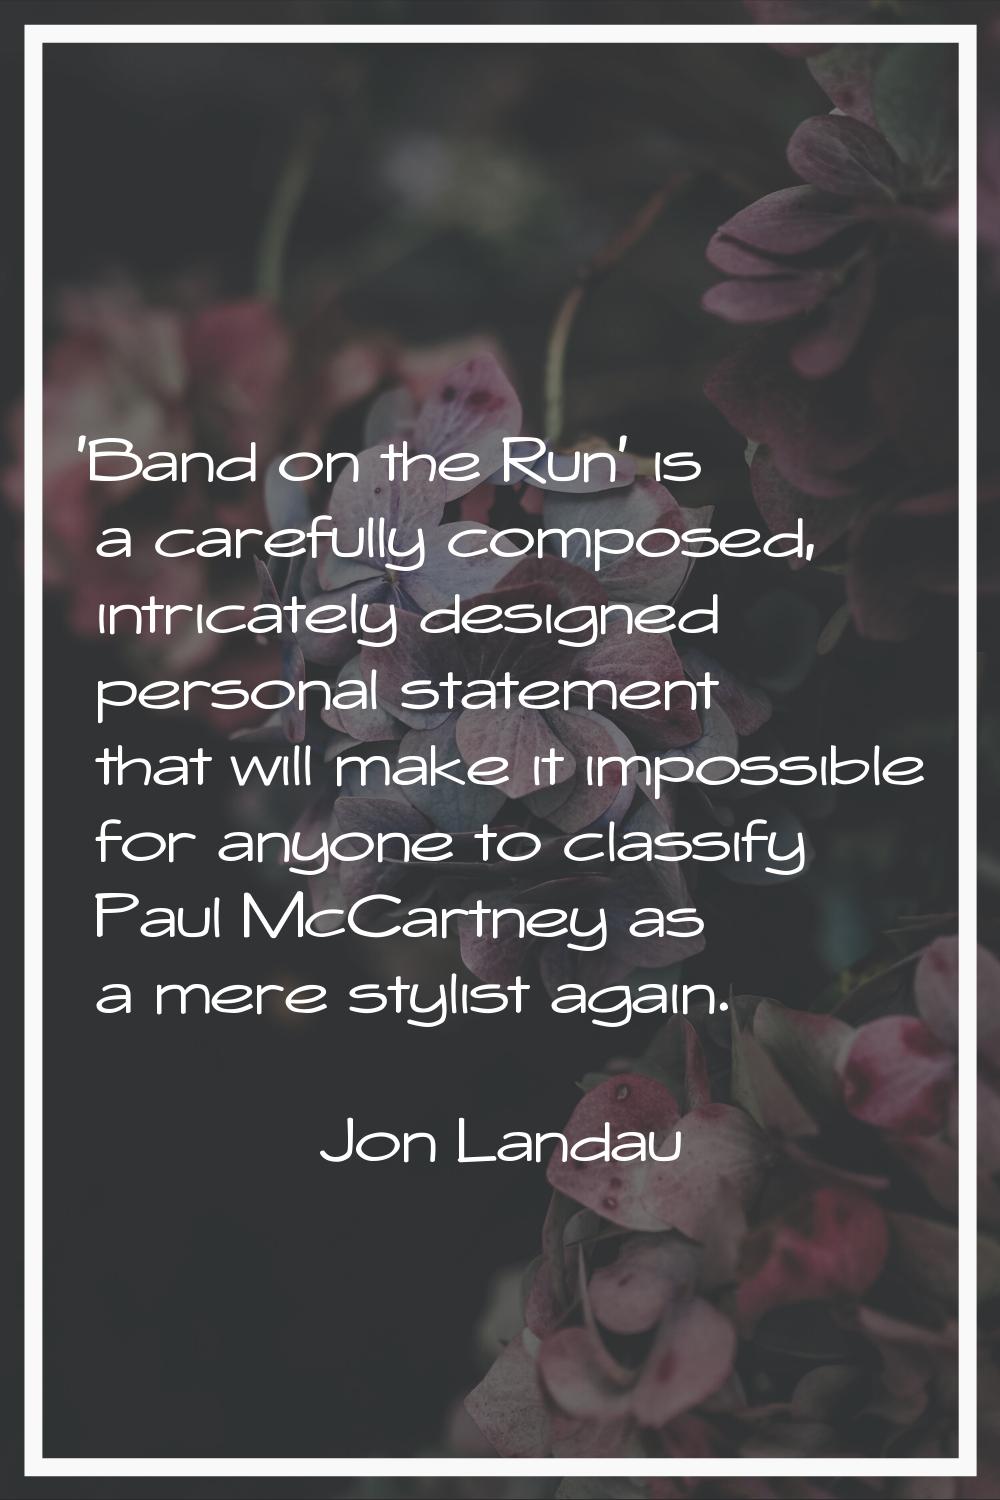 'Band on the Run' is a carefully composed, intricately designed personal statement that will make i